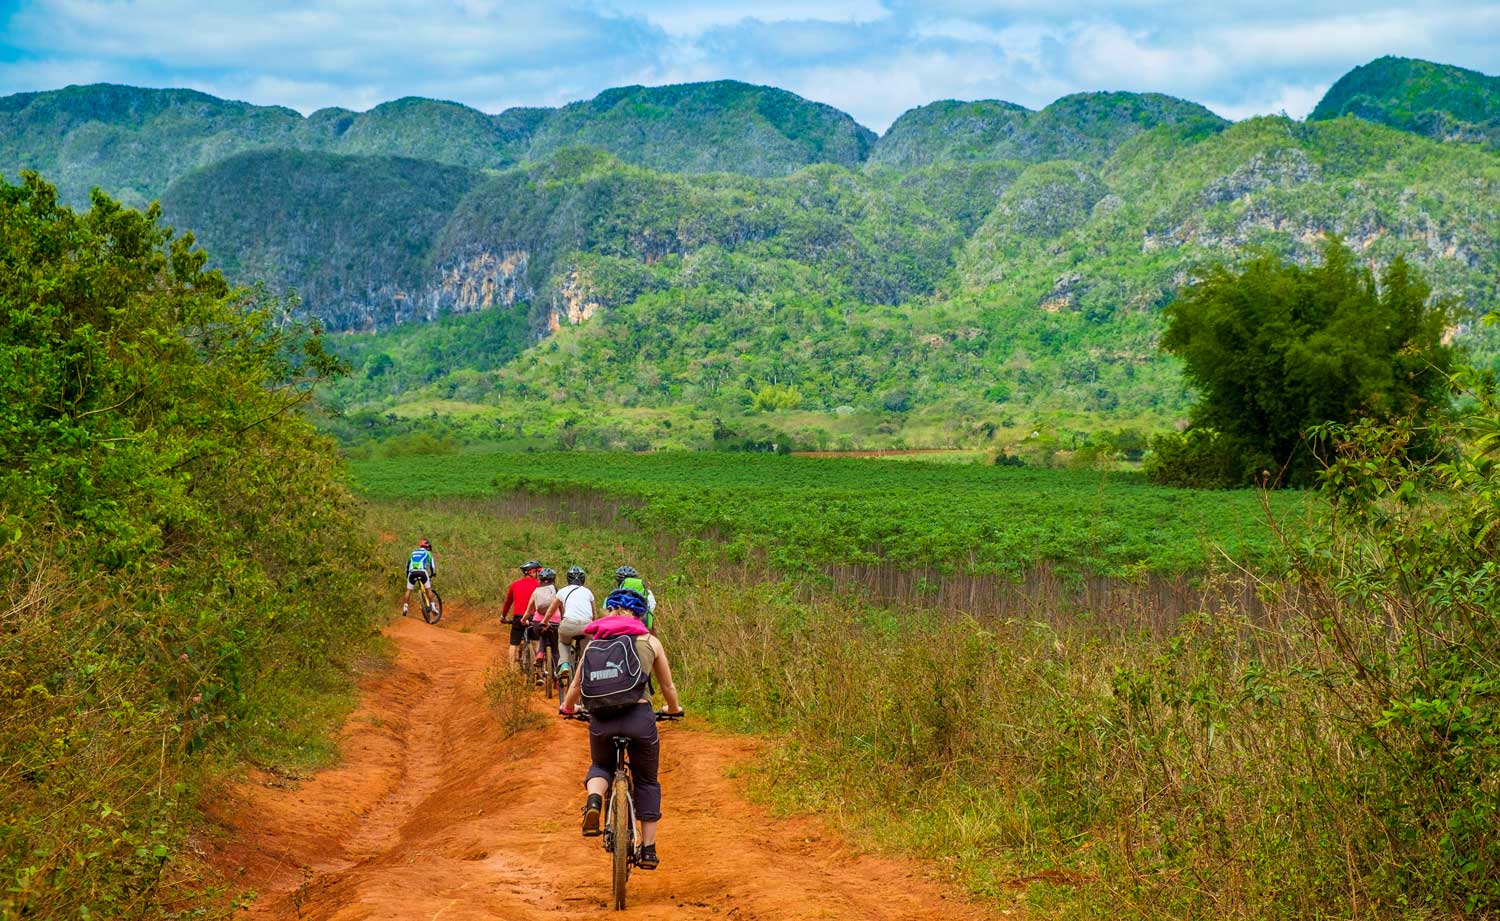 group of mountain bikers on red dirt path in mountainous valley